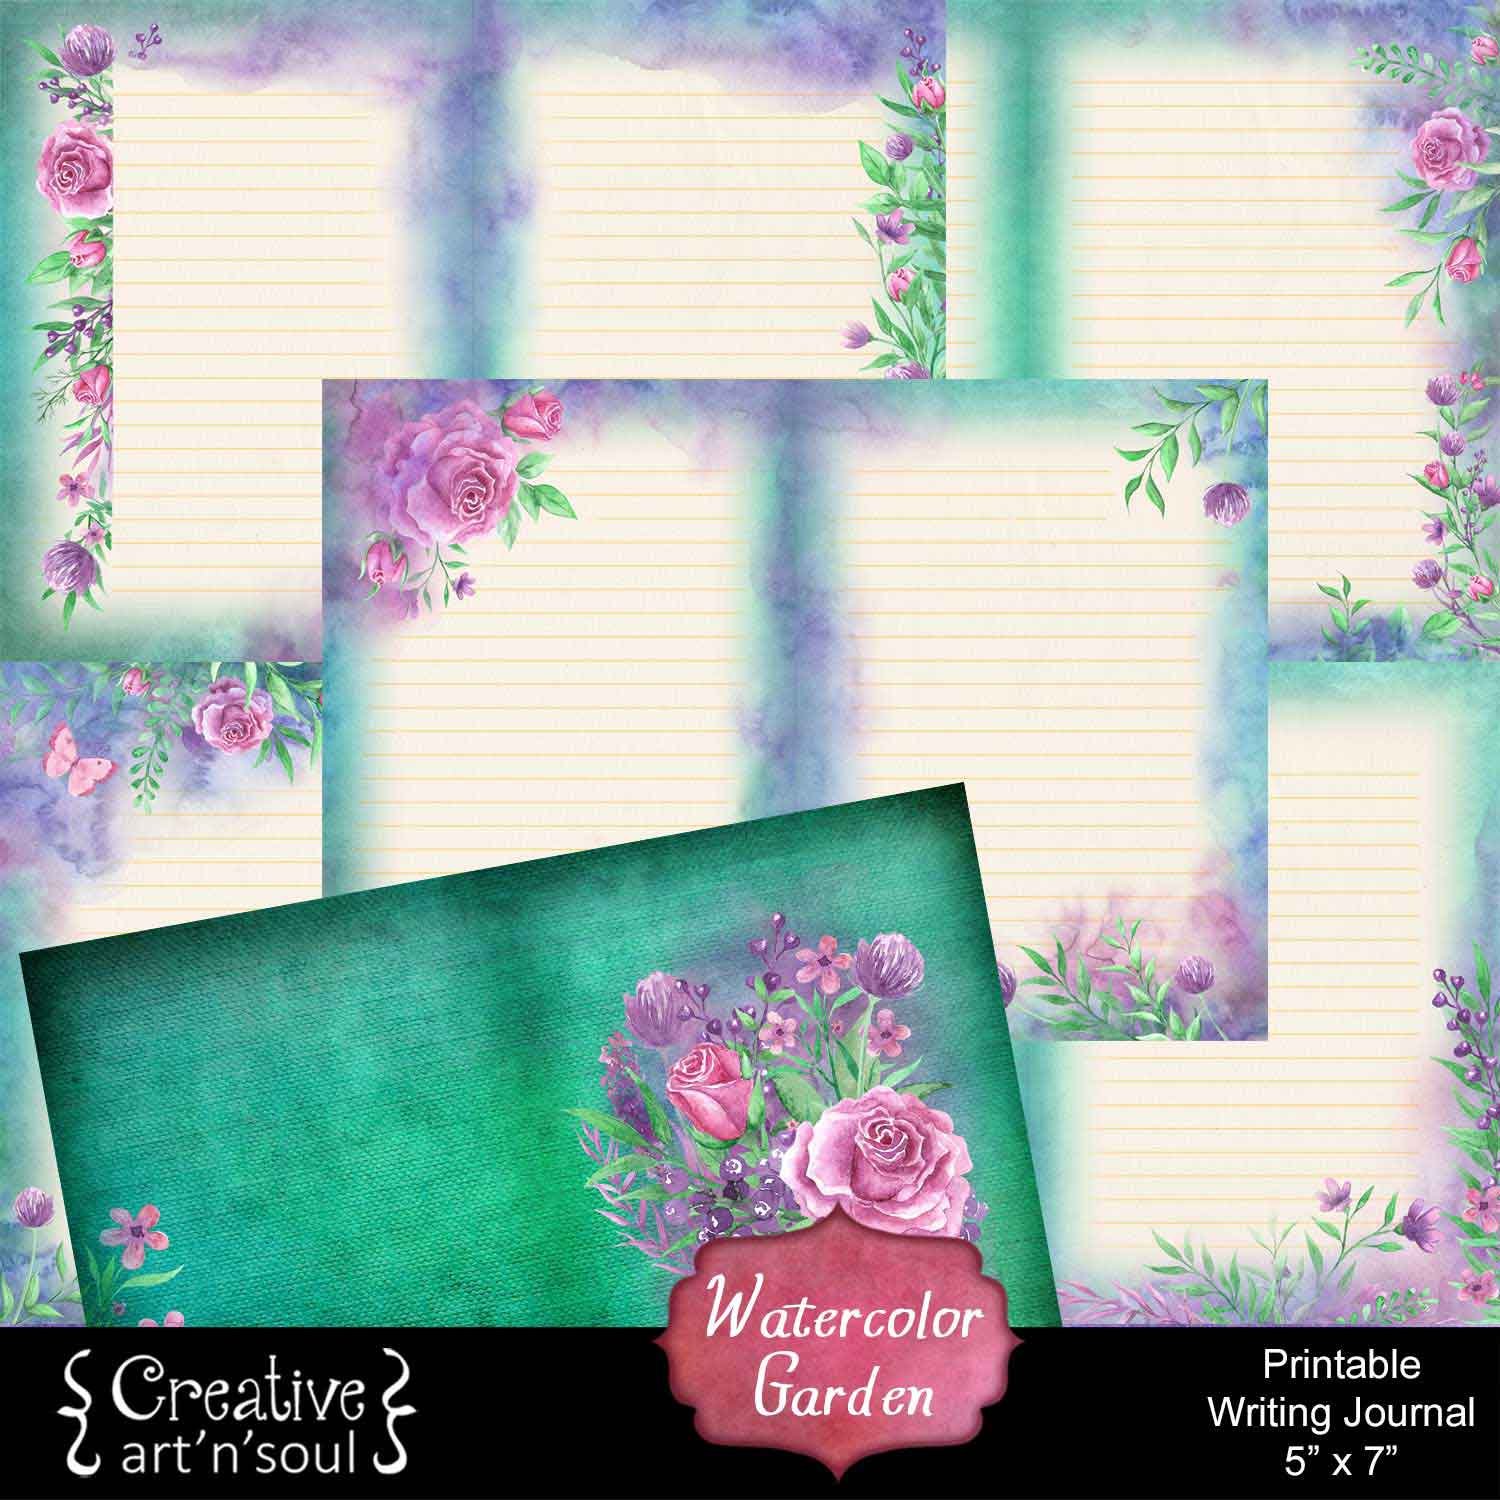 New in the Store: Watercolor Garden Printable Writing Journal